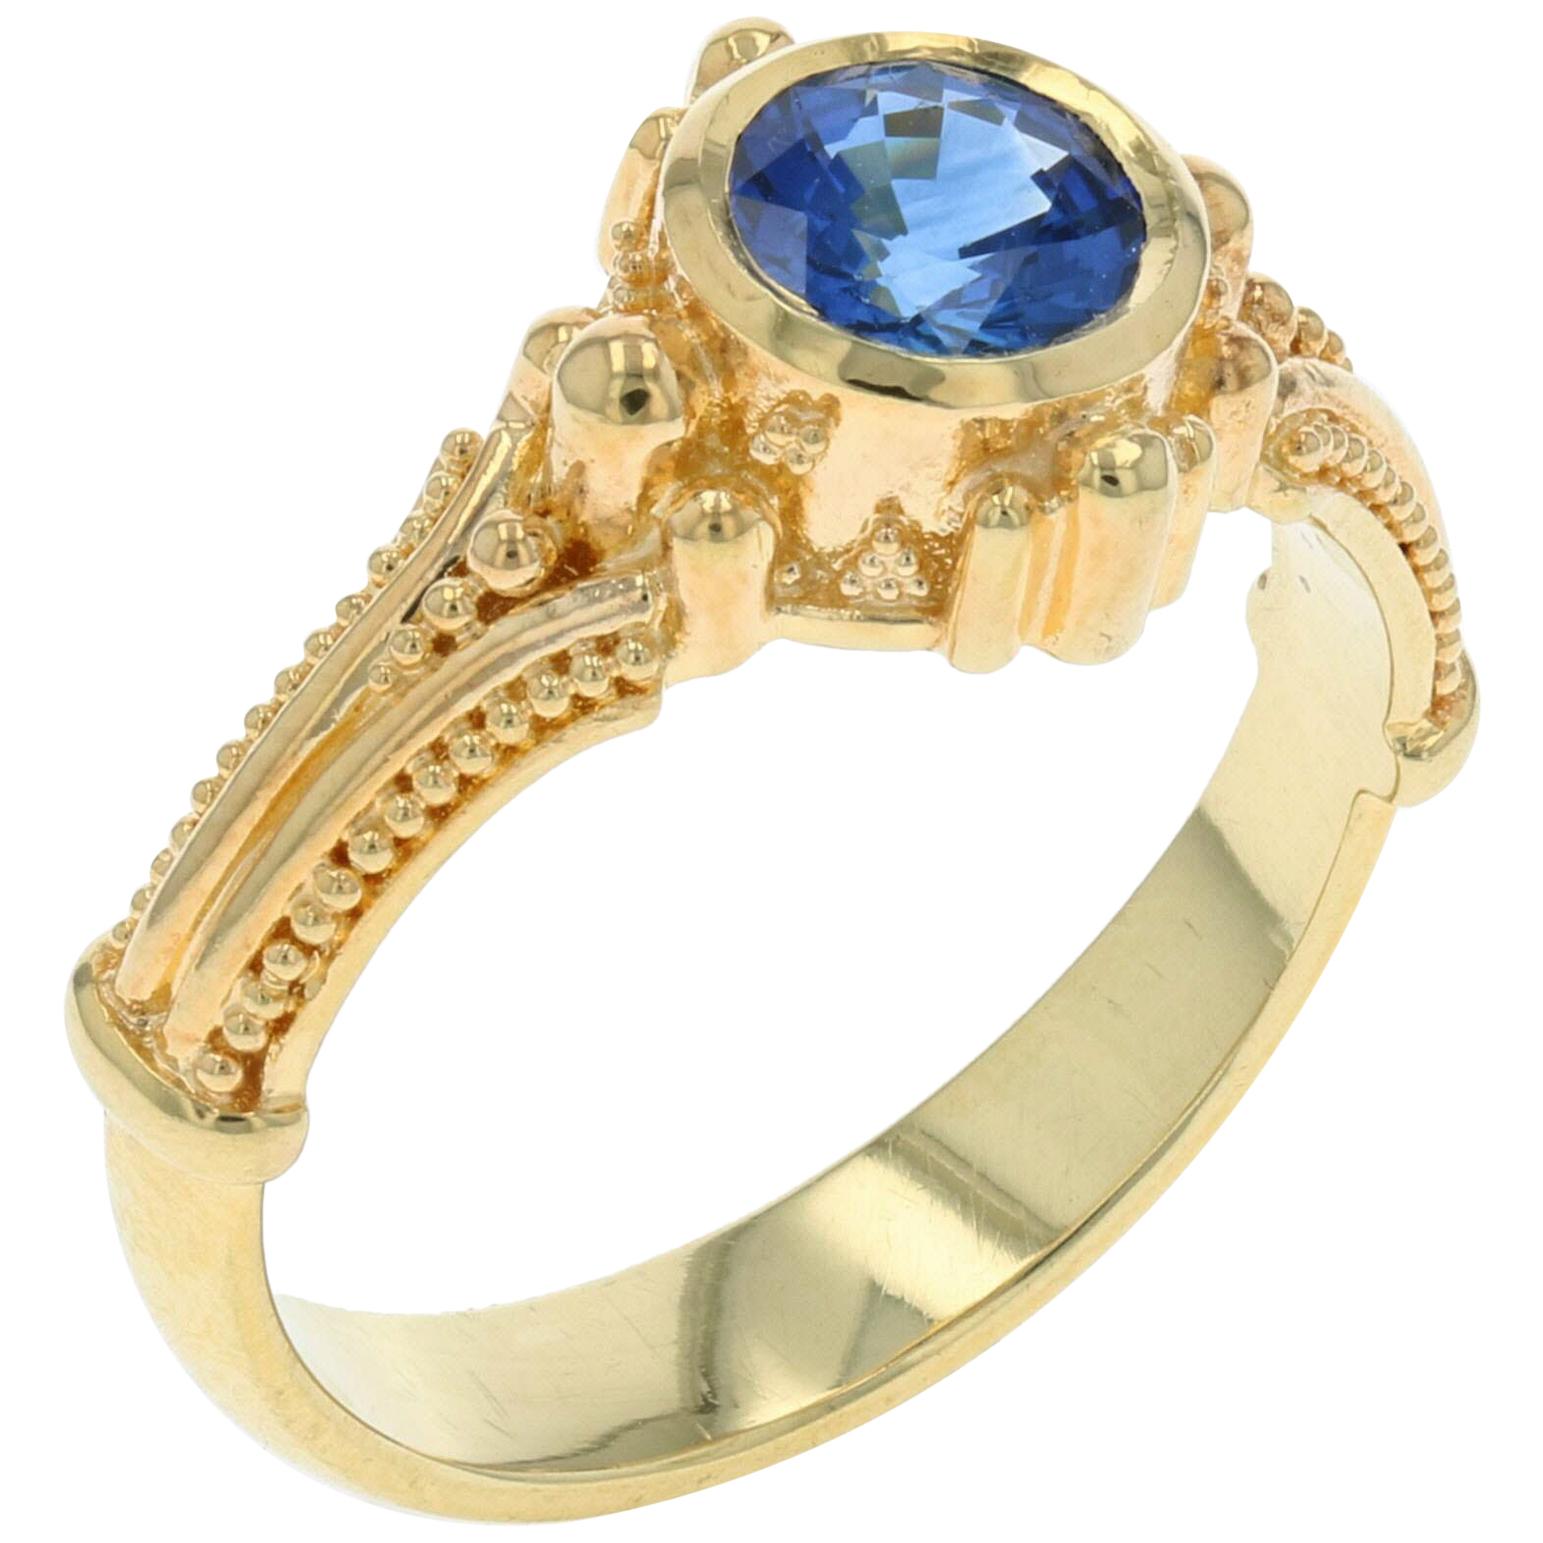 Kent Raible Blue Sapphire 18 Karat Gold Solitaire Ring with Granulation